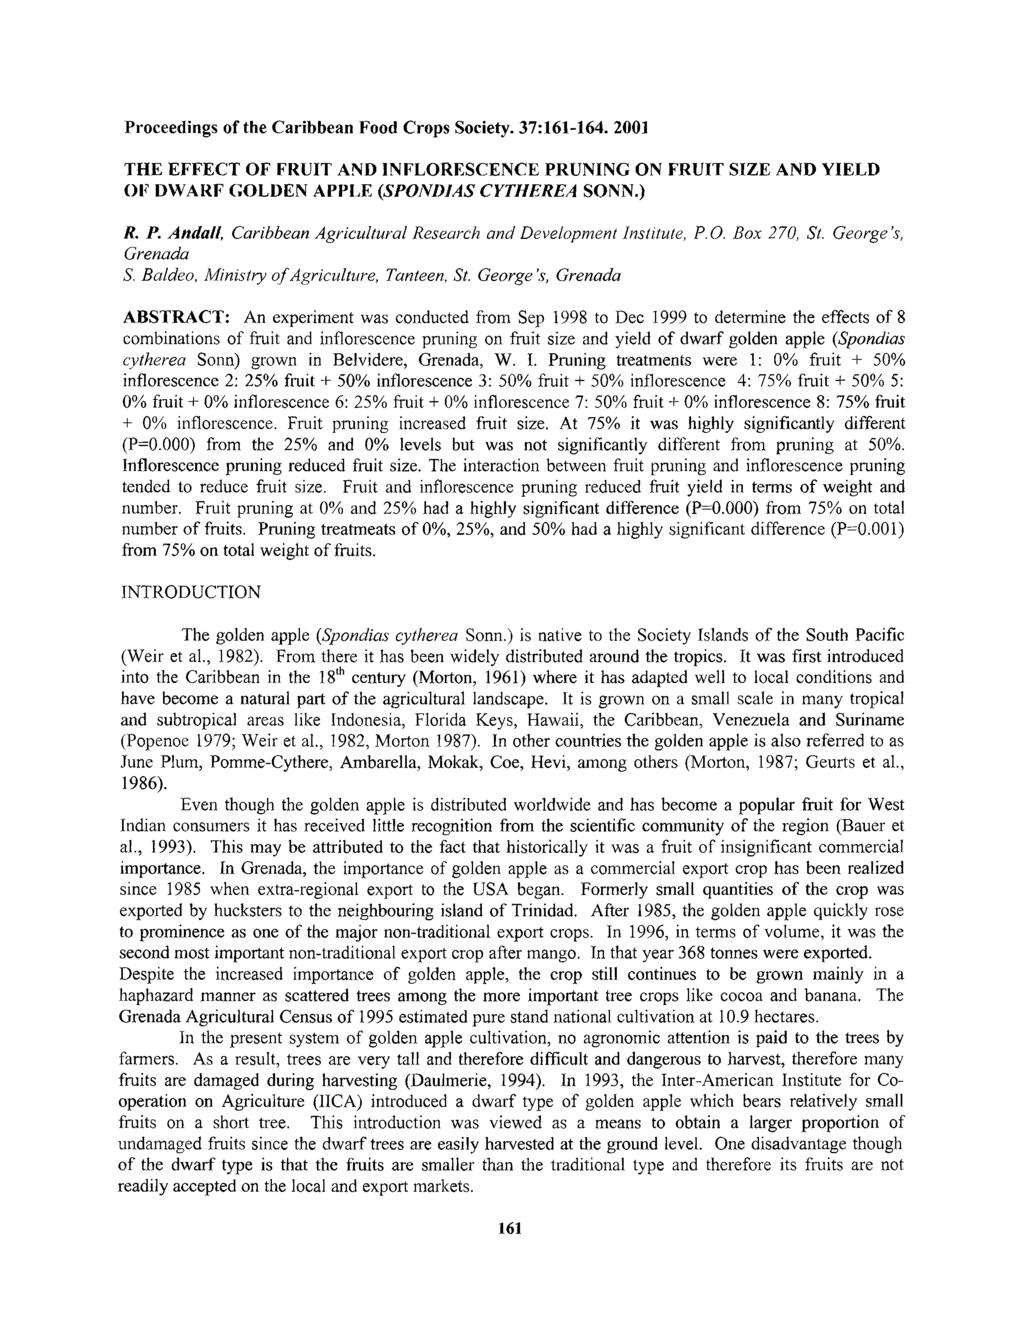 Proceedings of the Caribbean Food Crops Society. 37:116-118. 2001 THE EFFECT OF FRUIT AND INFLORESCENCE PRUNING ON FRUIT SIZE AND YIELD OF DWARF GOLDEN APPLE (SPONDJAS CYTHEREA SONN.) R. P. Andall, Caribbean Agricultural Research and Development Institute, P.